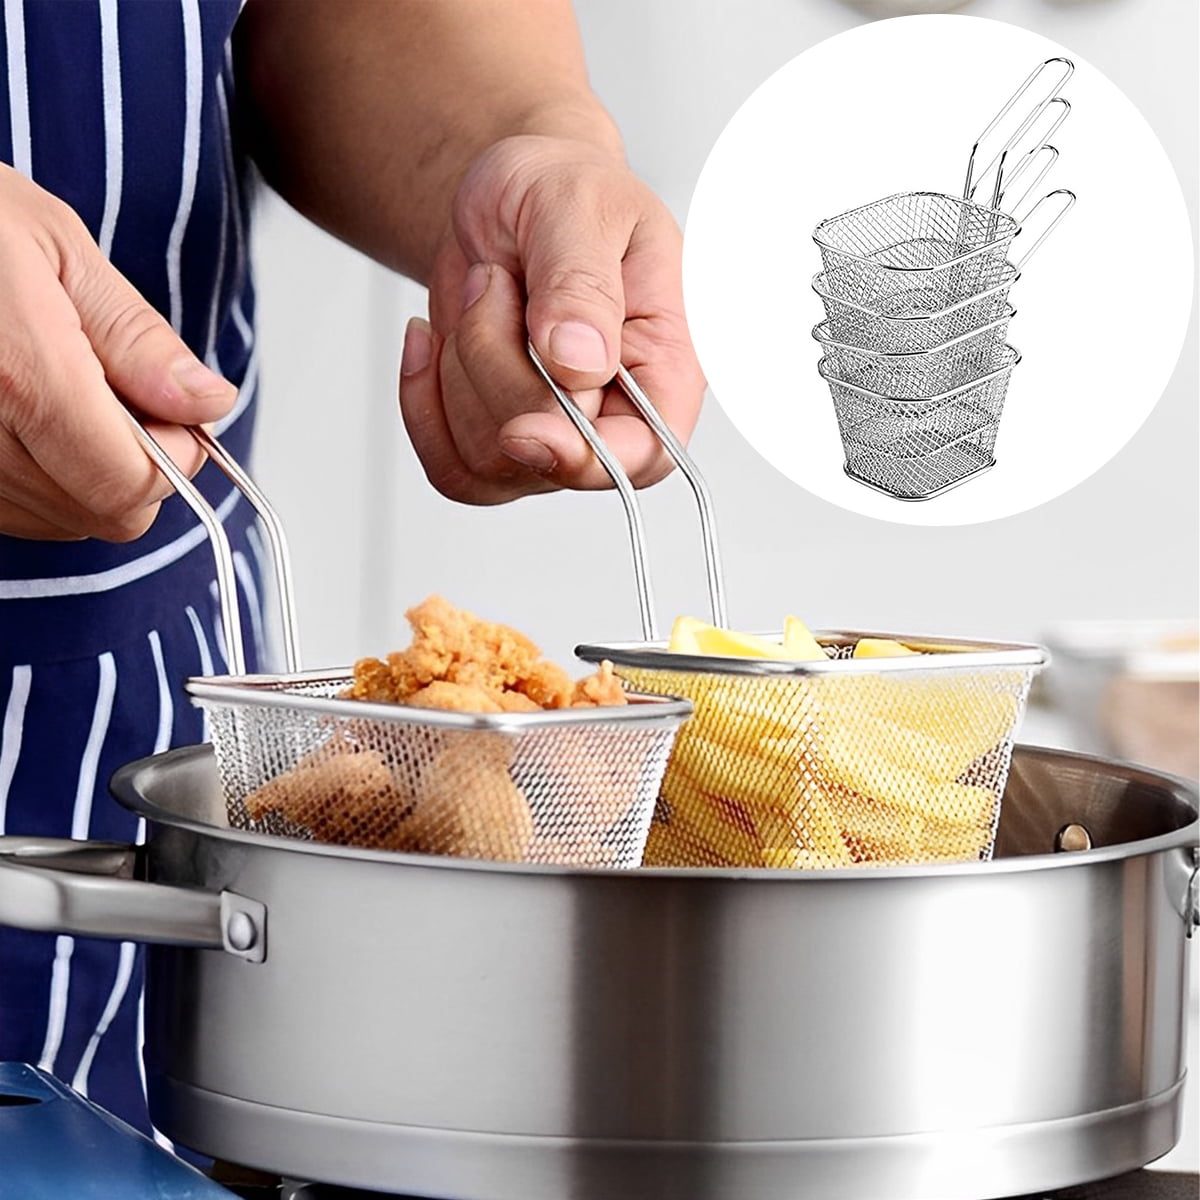 2pcs Deep Fryer Basket, Stainless Steel Fry Basket with Non-Slip Handle, Sturdy Square Food Strainer for Home and Commercial Use, Size: 11.027, Silver